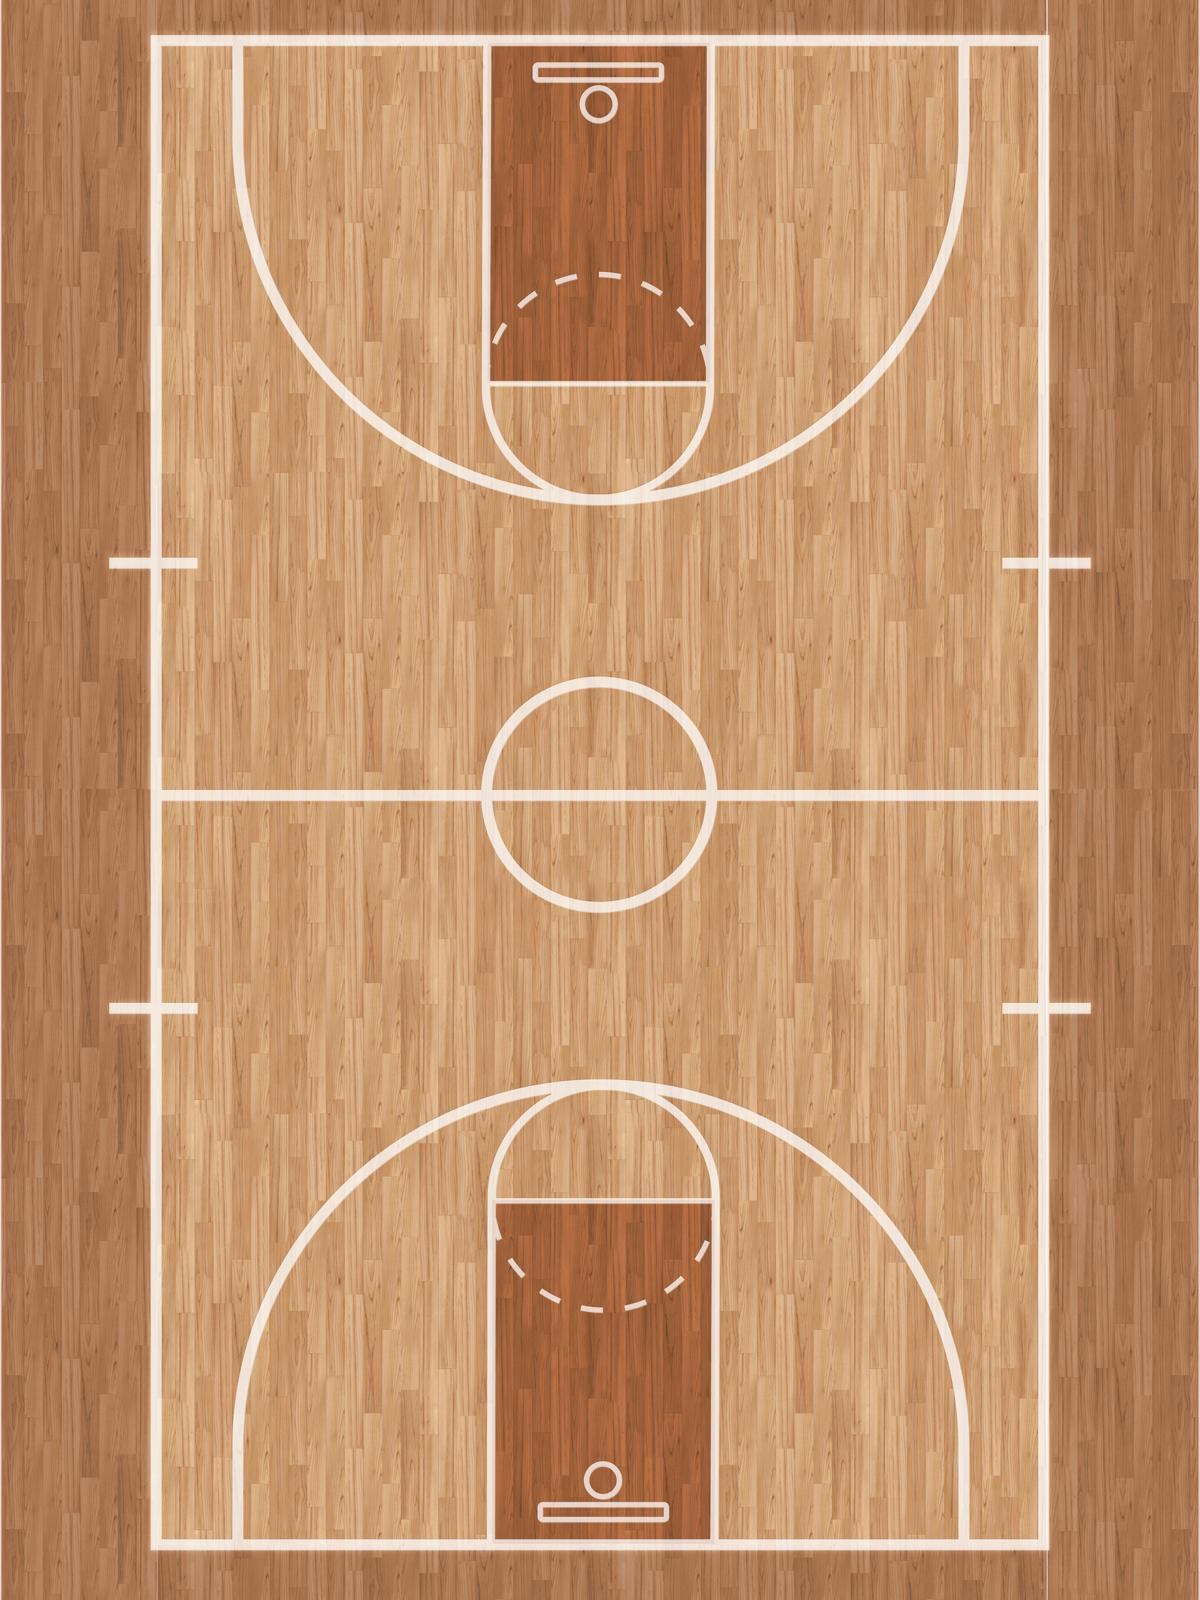 The Different Layouts and Measurements of a Basketball Court